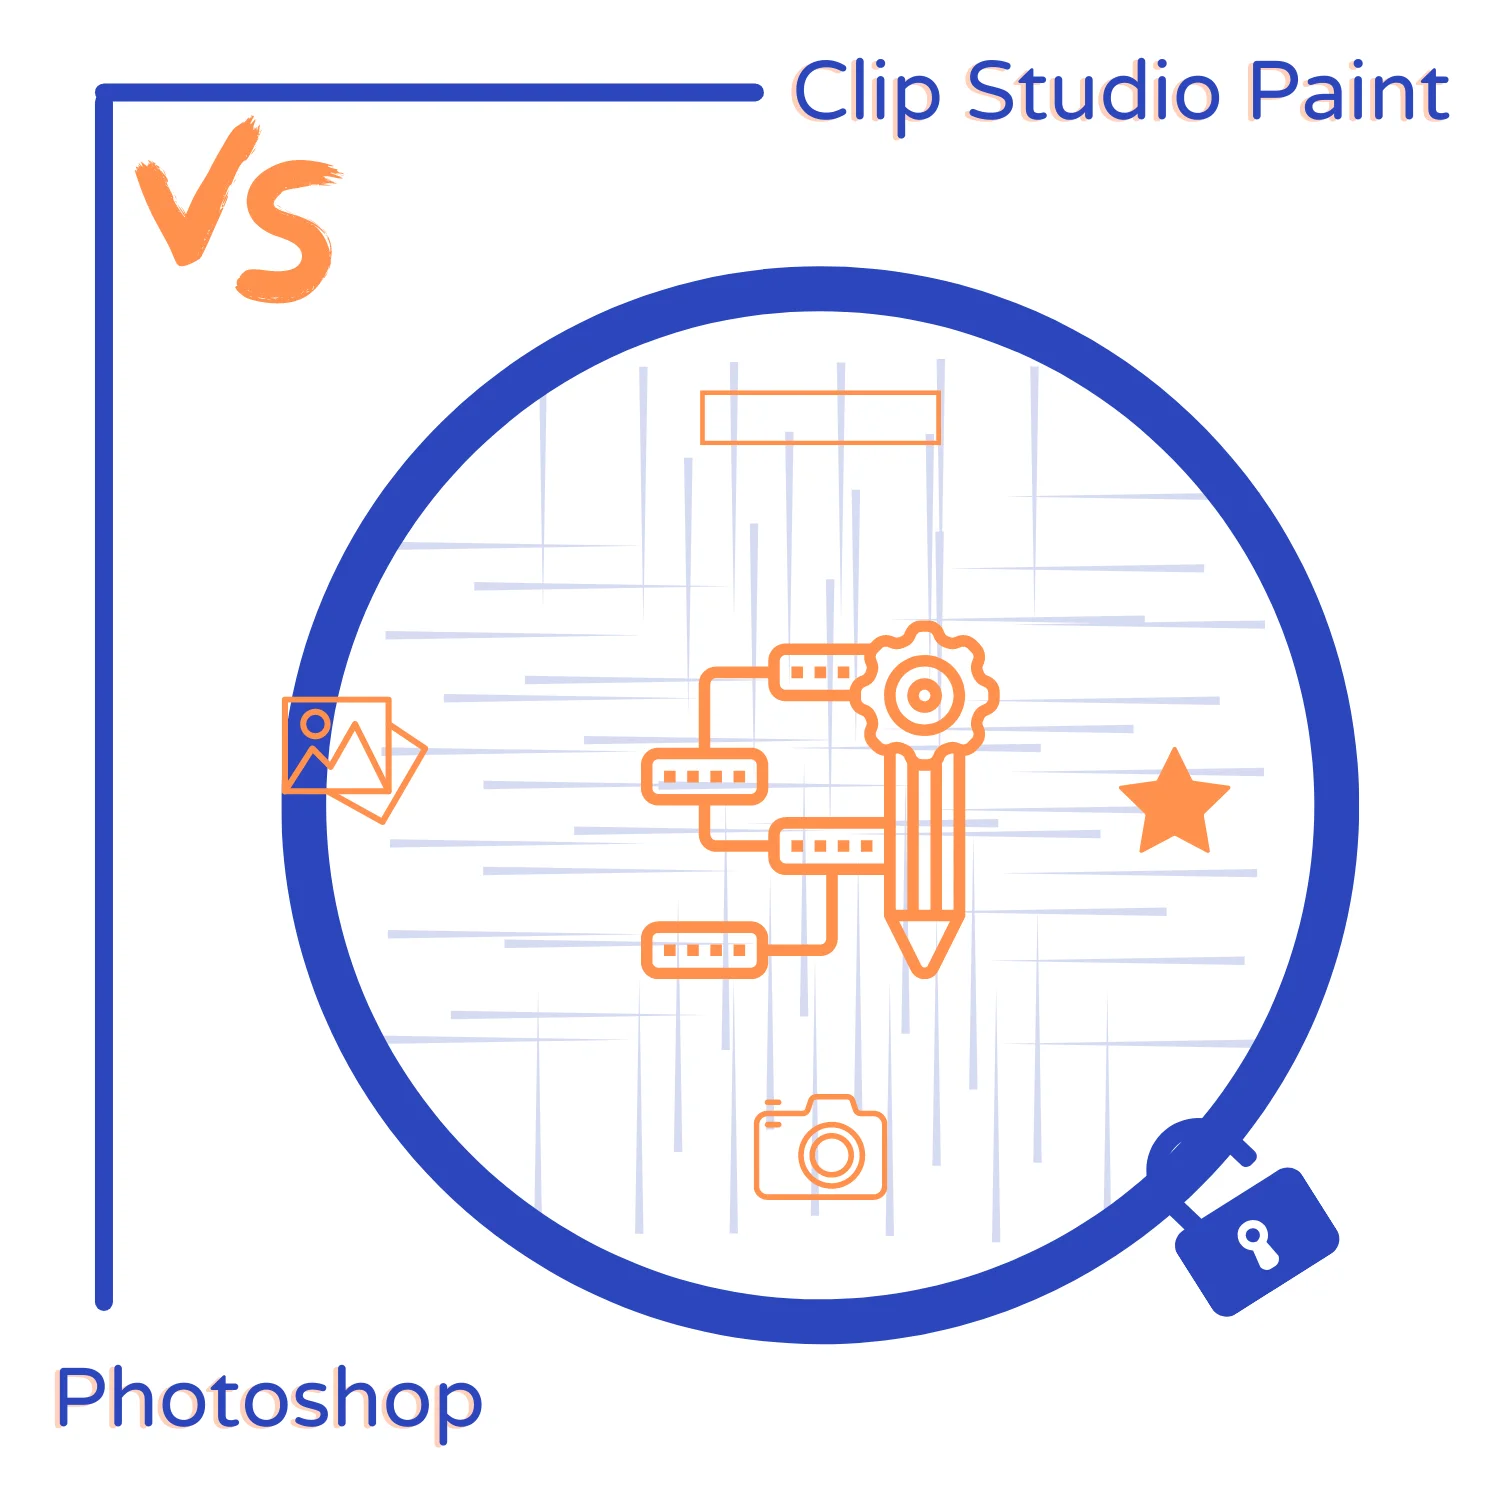 A tiempo lanzadera músico Clip Studio Paint vs. Photoshop - Which is the Best in 2023